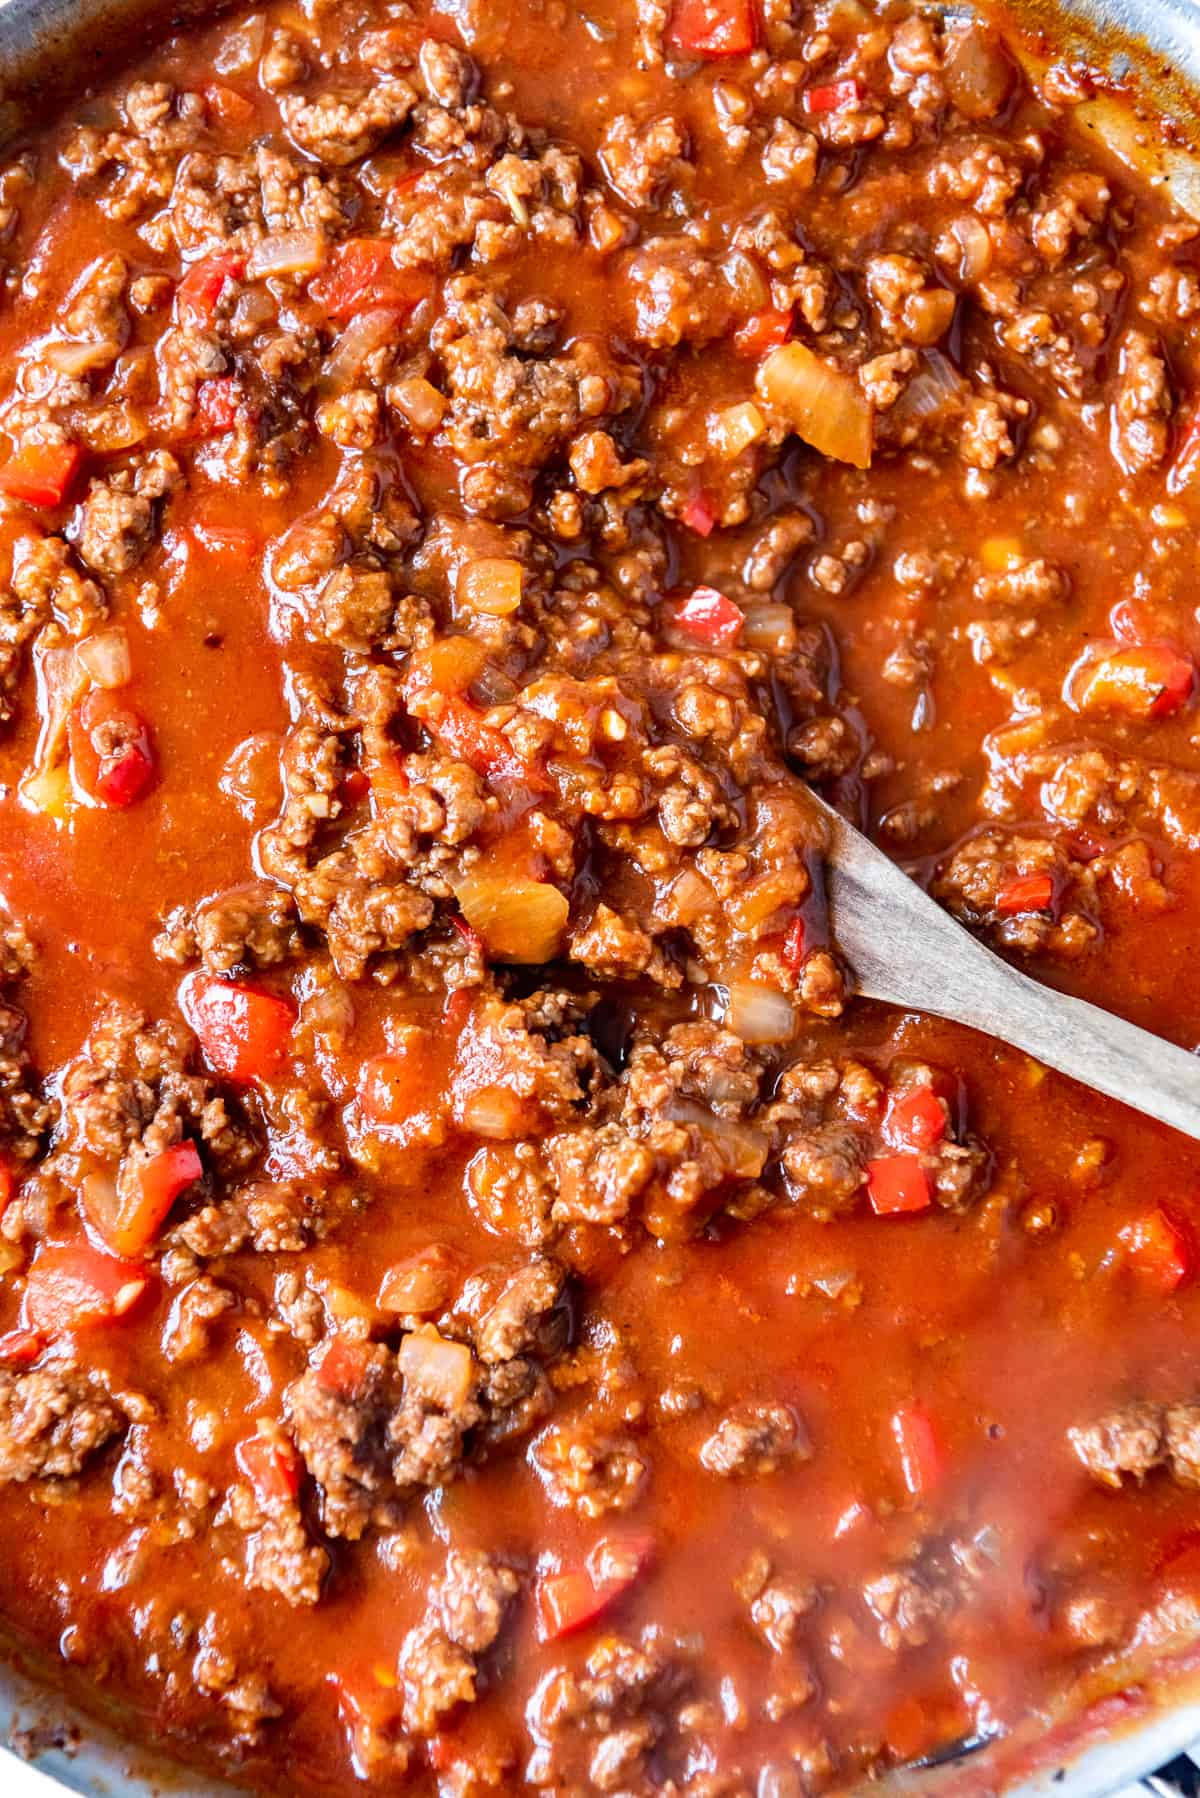 A close up image of browned ground beef and vegetables in homemade sloppy joe sauce.